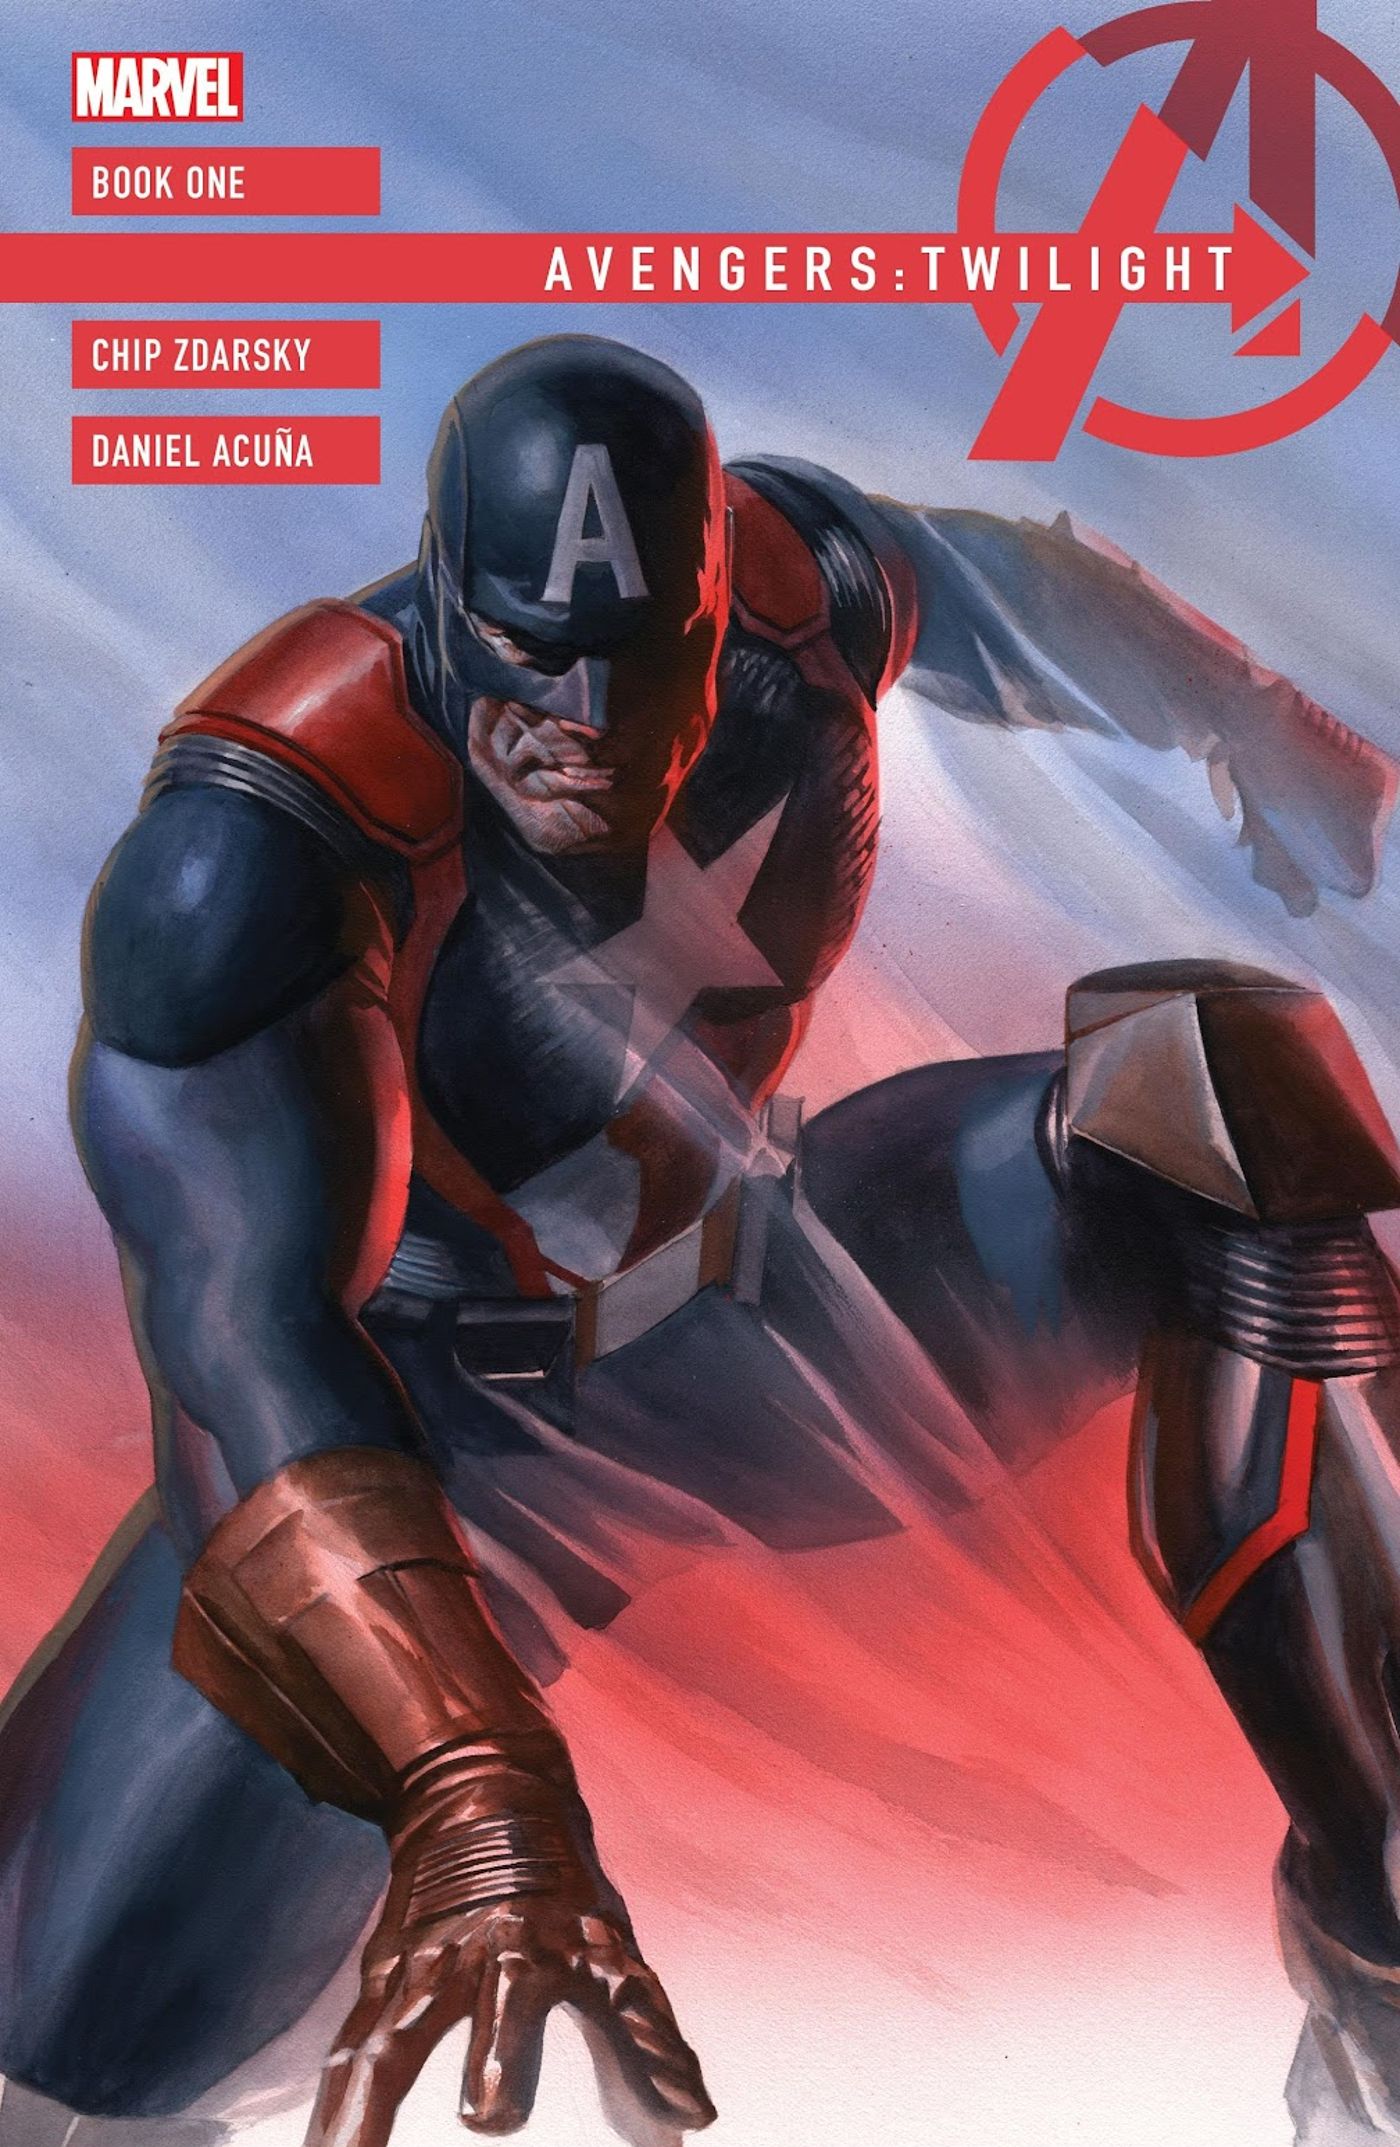 Avengers Twilight #1 Main Cover, an aged Captain America poised to fight in his suit. 